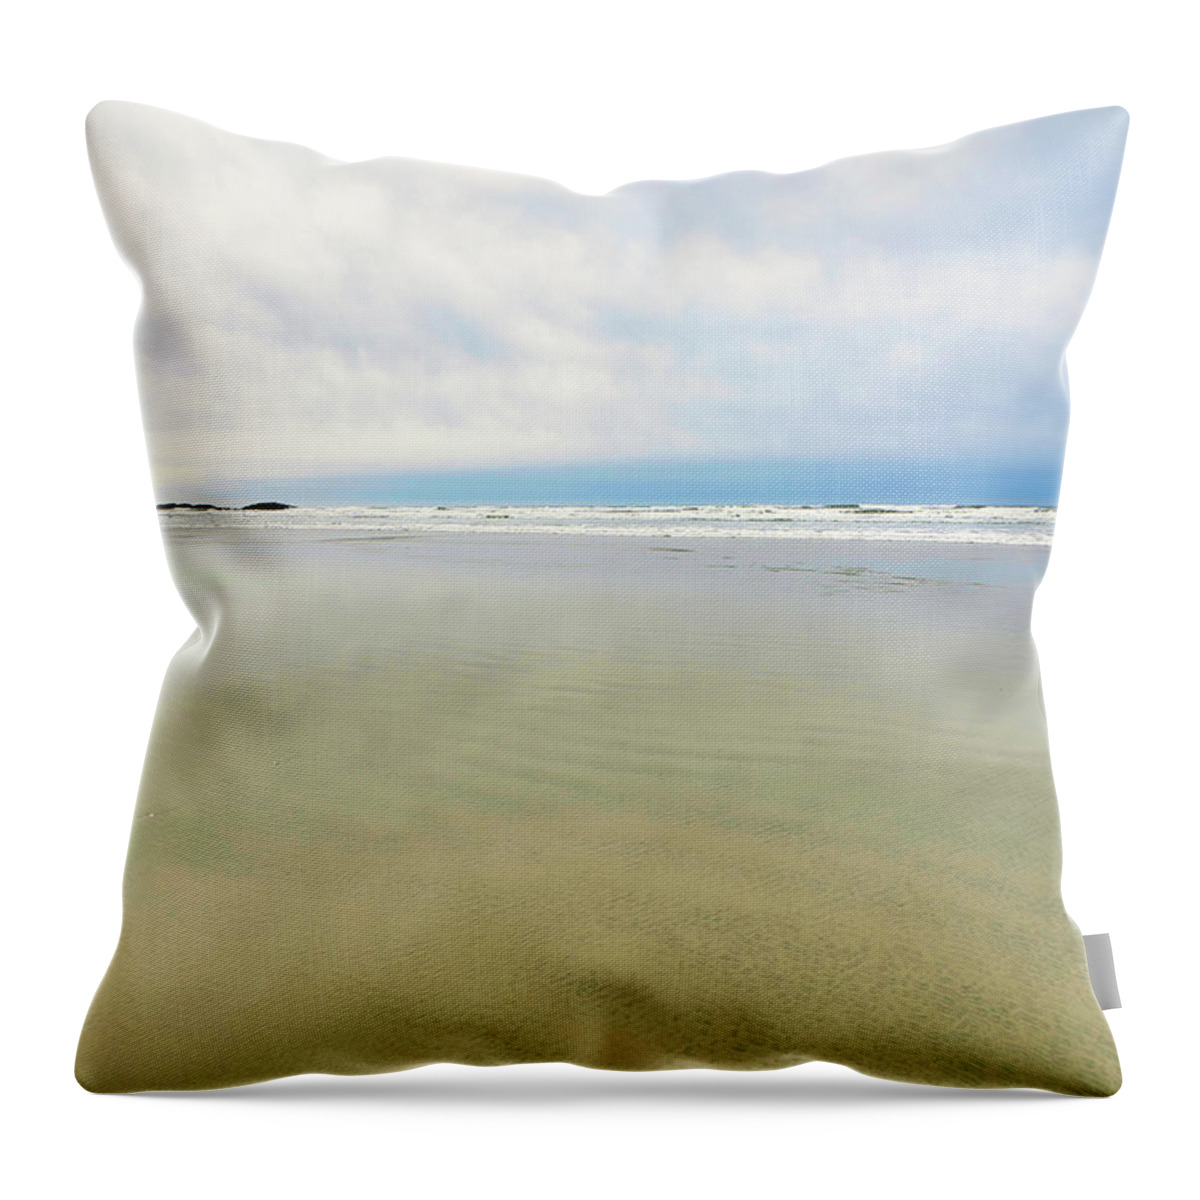 Seascape Throw Pillow featuring the photograph Beach and Sea by Allan Van Gasbeck